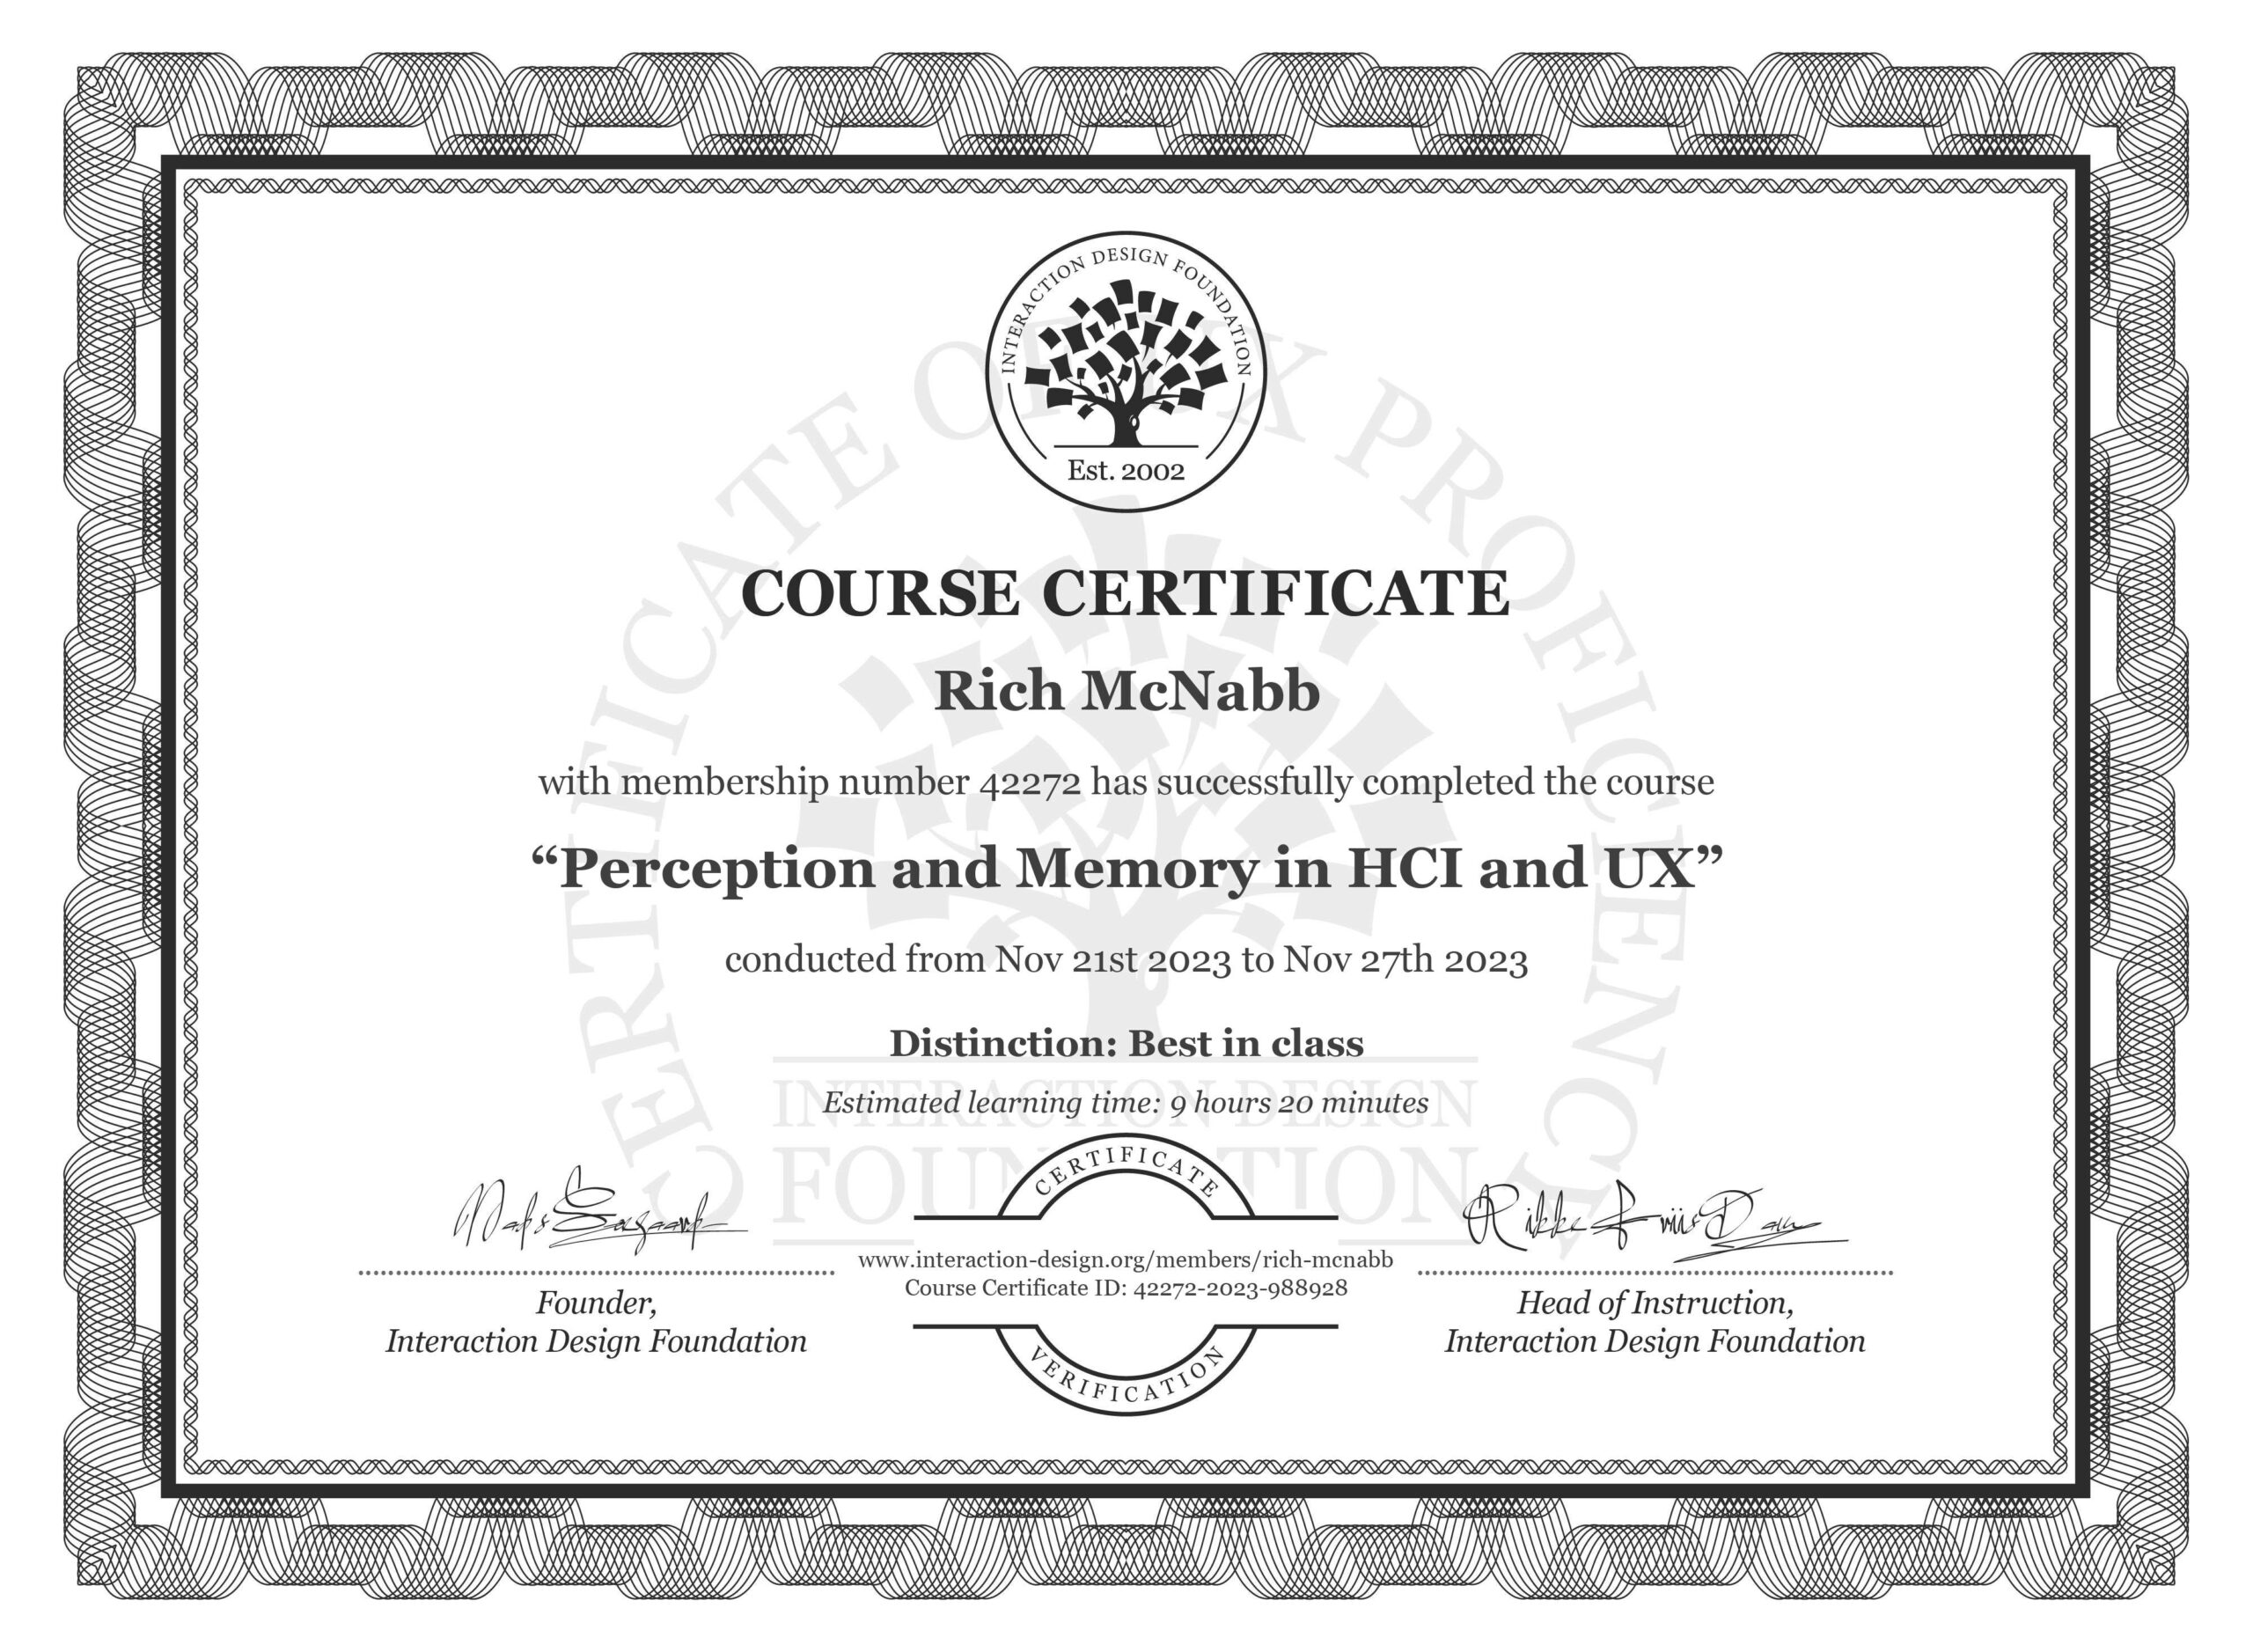 Perception and Memory in HCI and UX